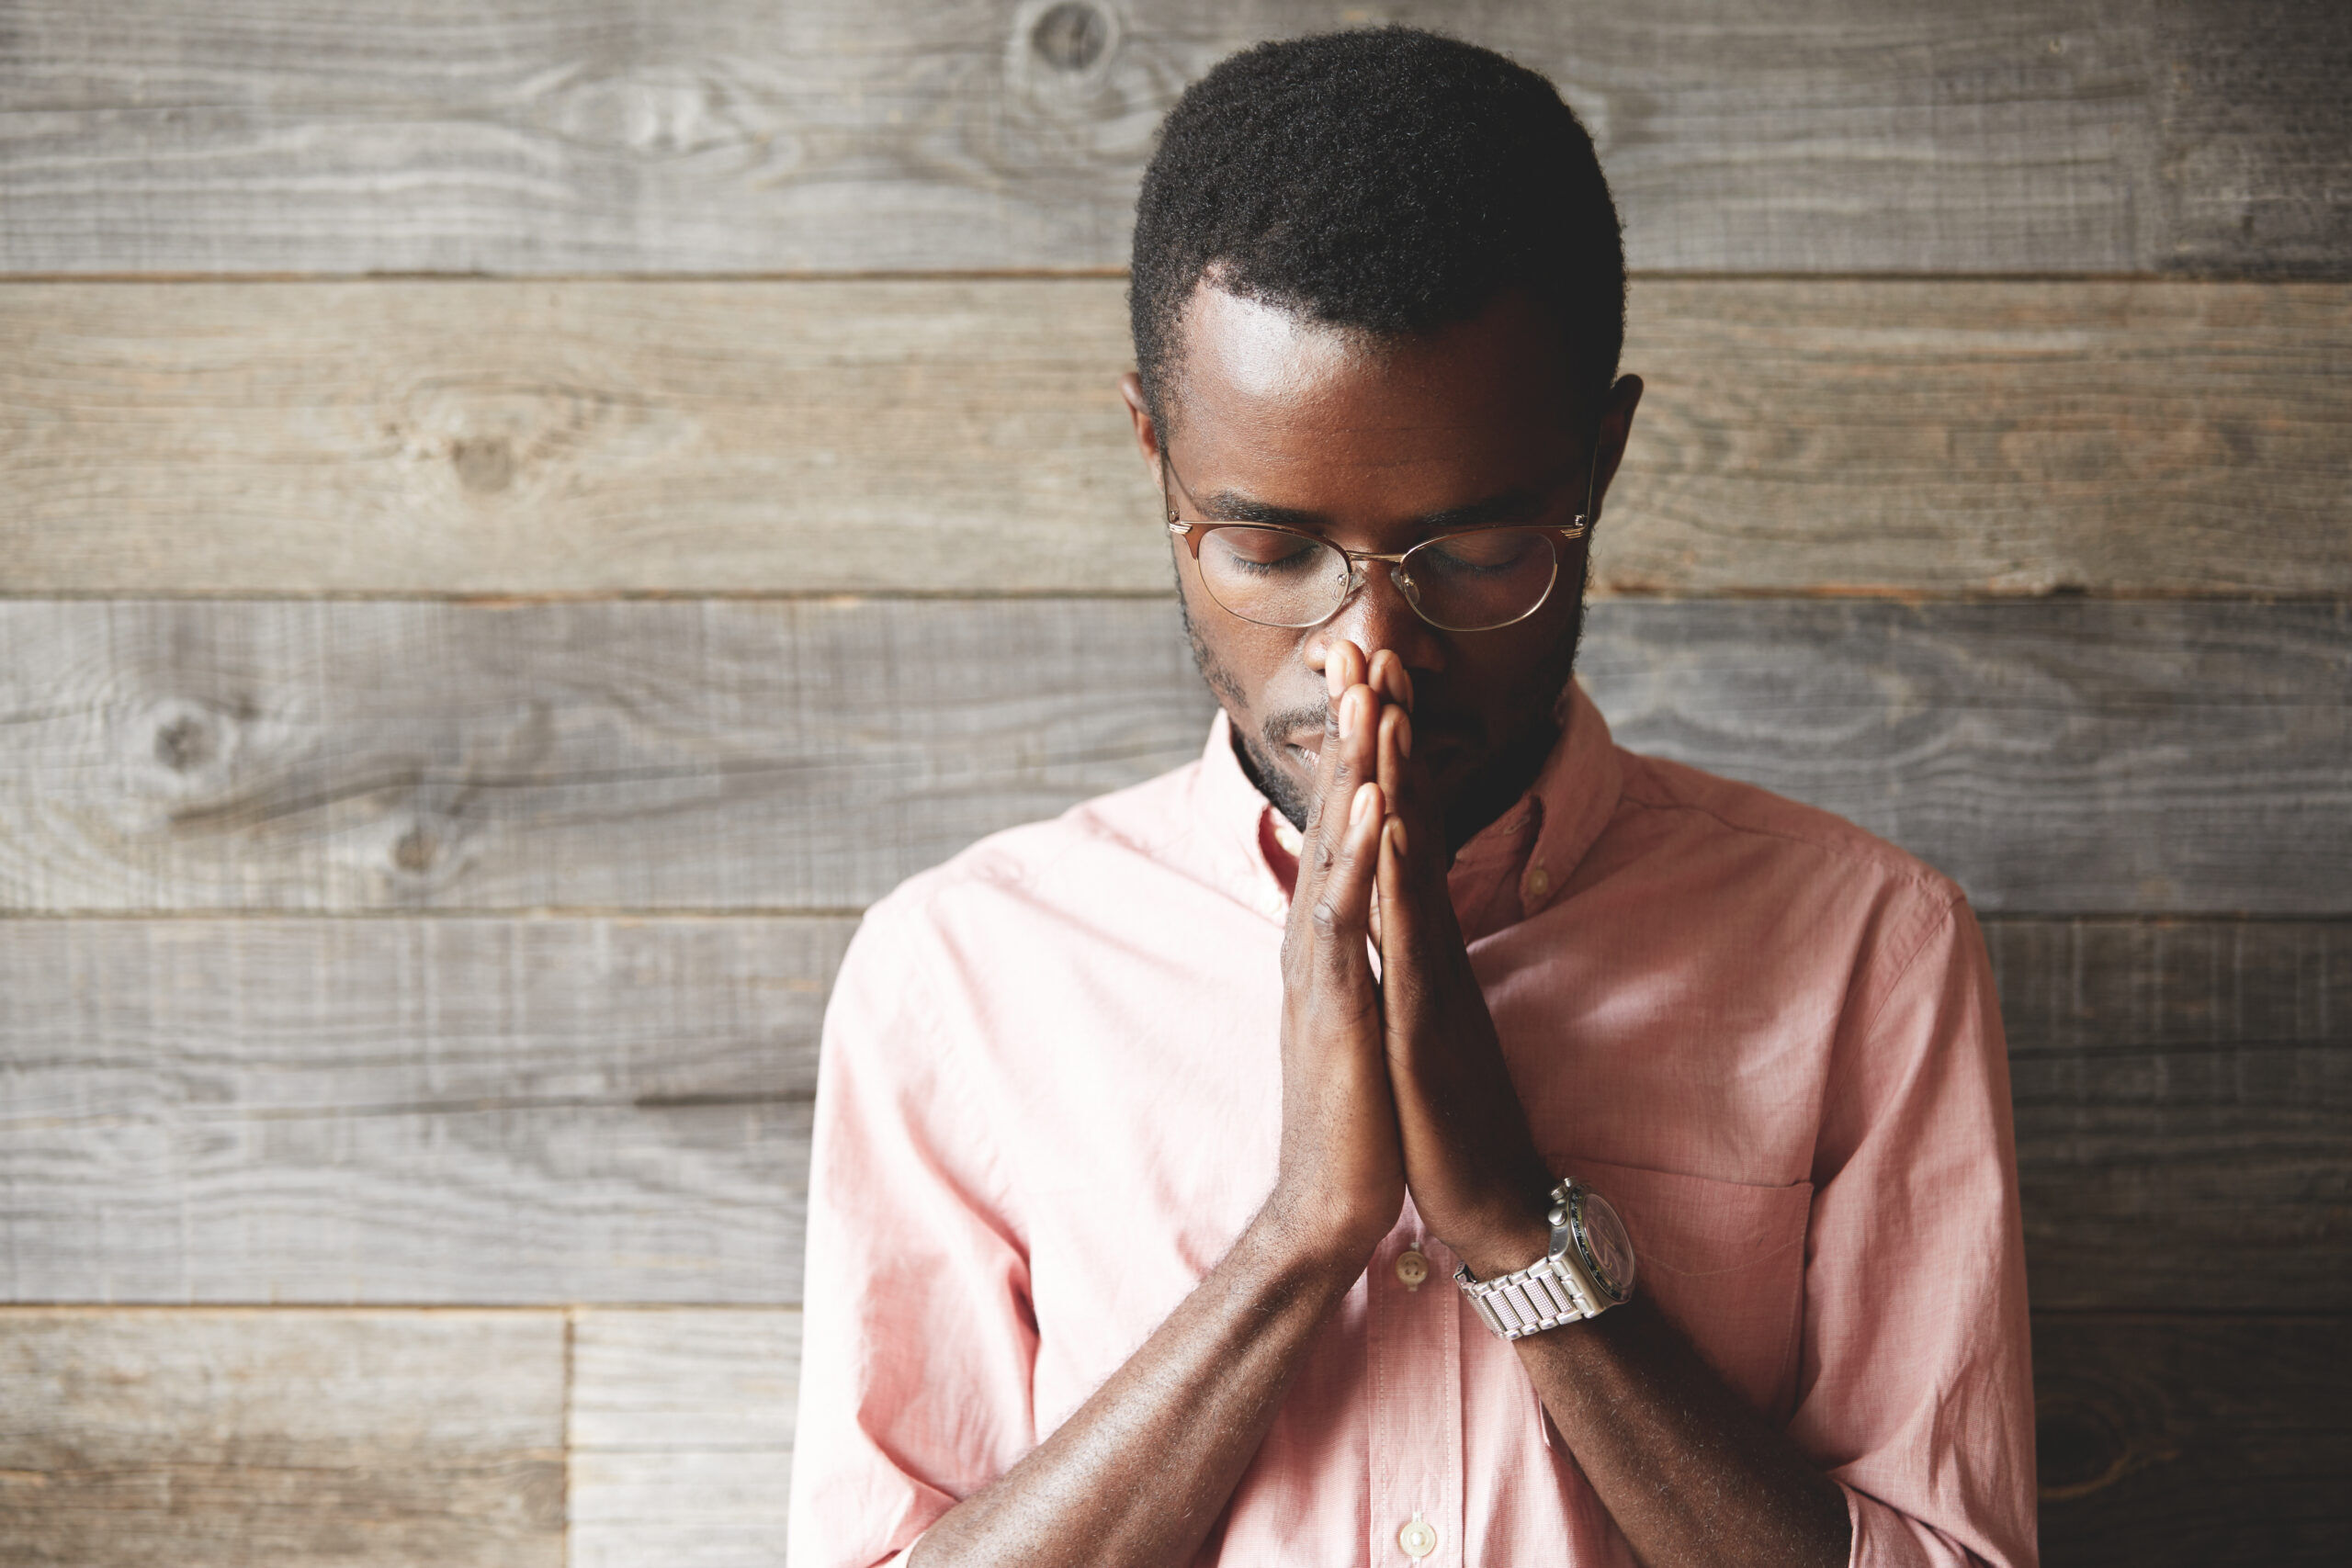 Young meditating and praying African American man wearing pink shirt and glasses, holding hands in prayer against his lips